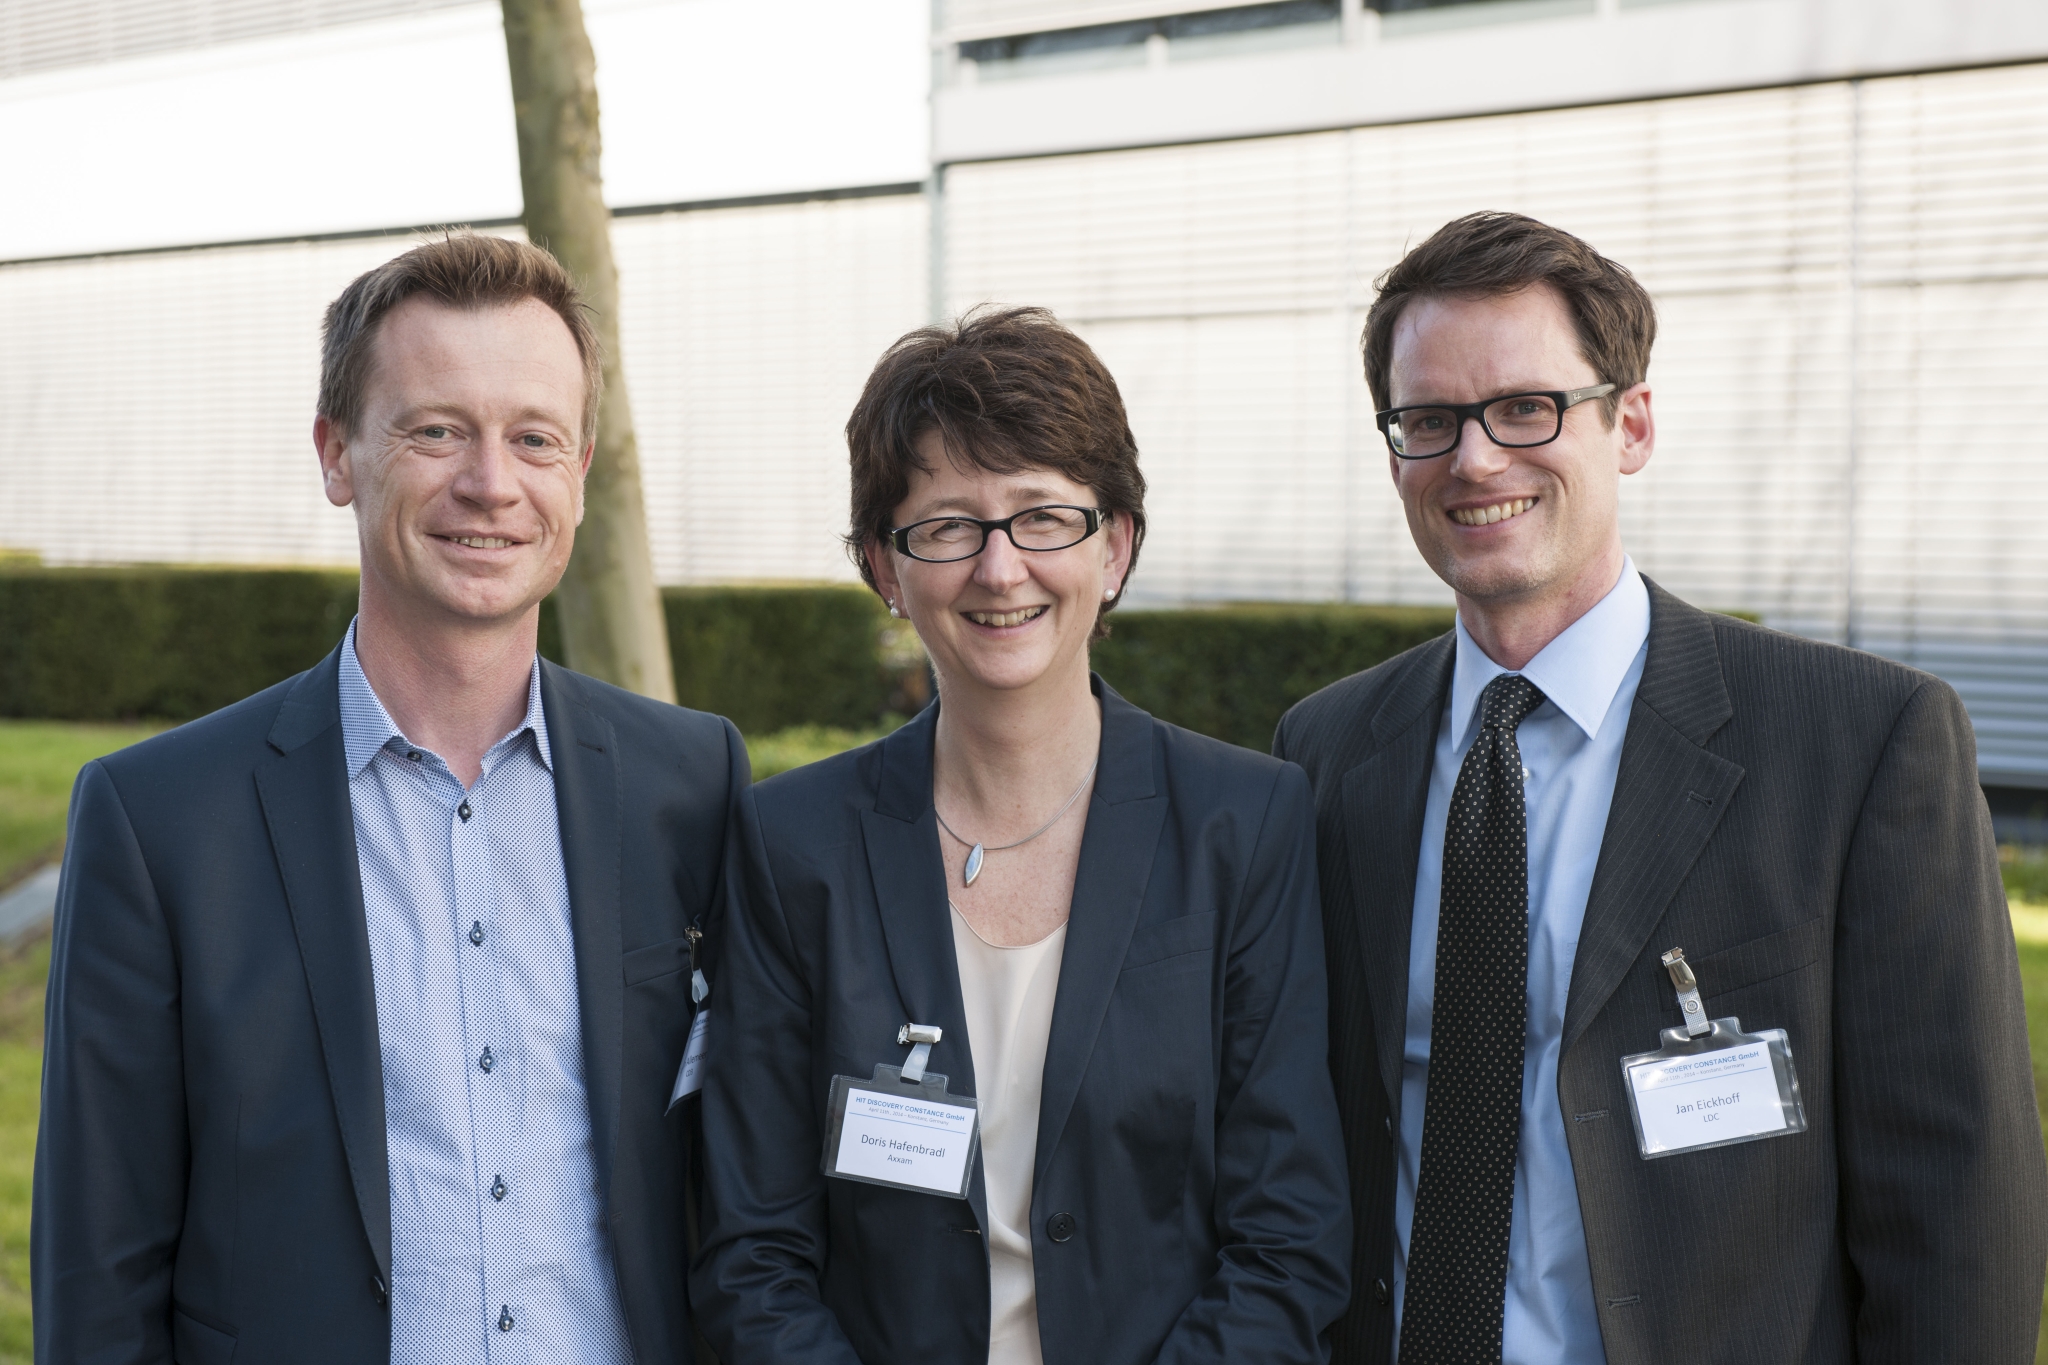 The photo shows Stefaan Allemeersch, Doris Hafenbradl and Jan Eickhoff (from left to right) – managing directors of HDC.